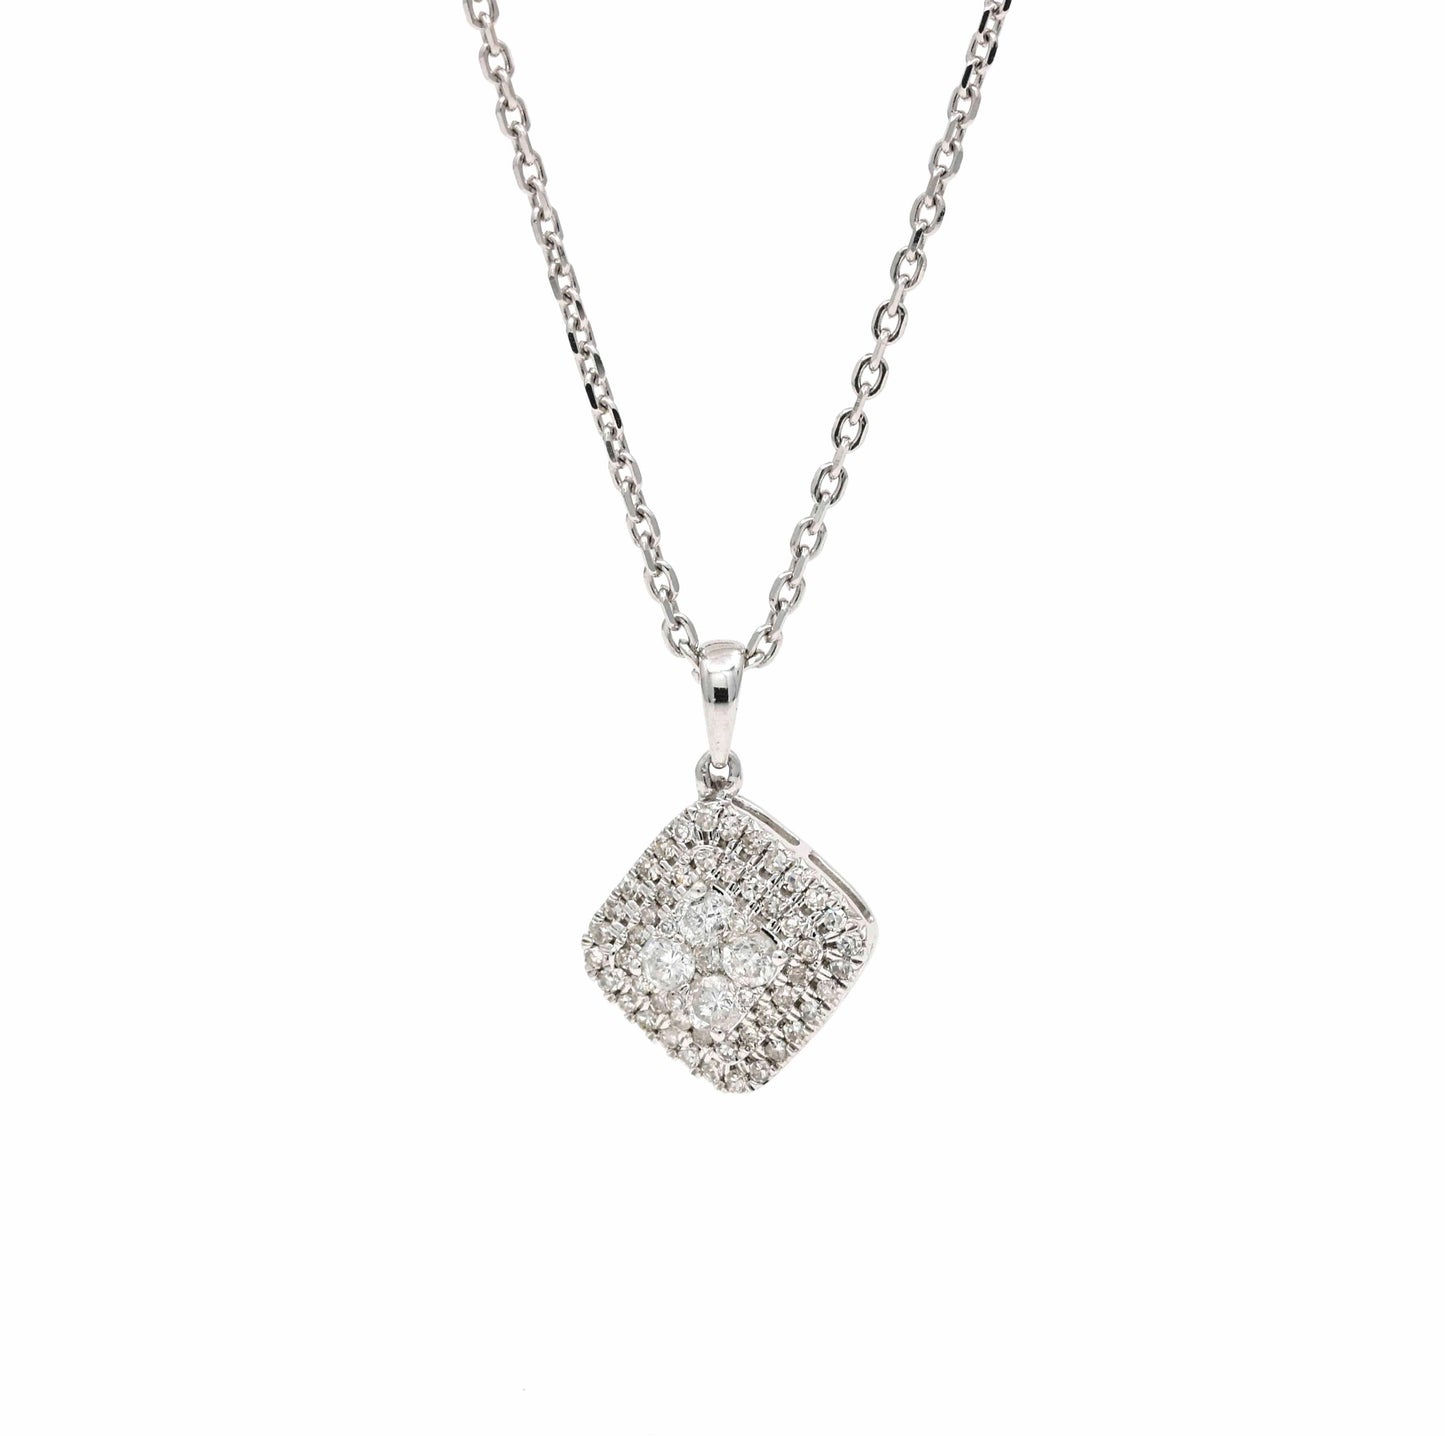 Women's Diamond Cluster Charm Pendant Necklace in 10k 14k White Gold - 31 Jewels Inc.